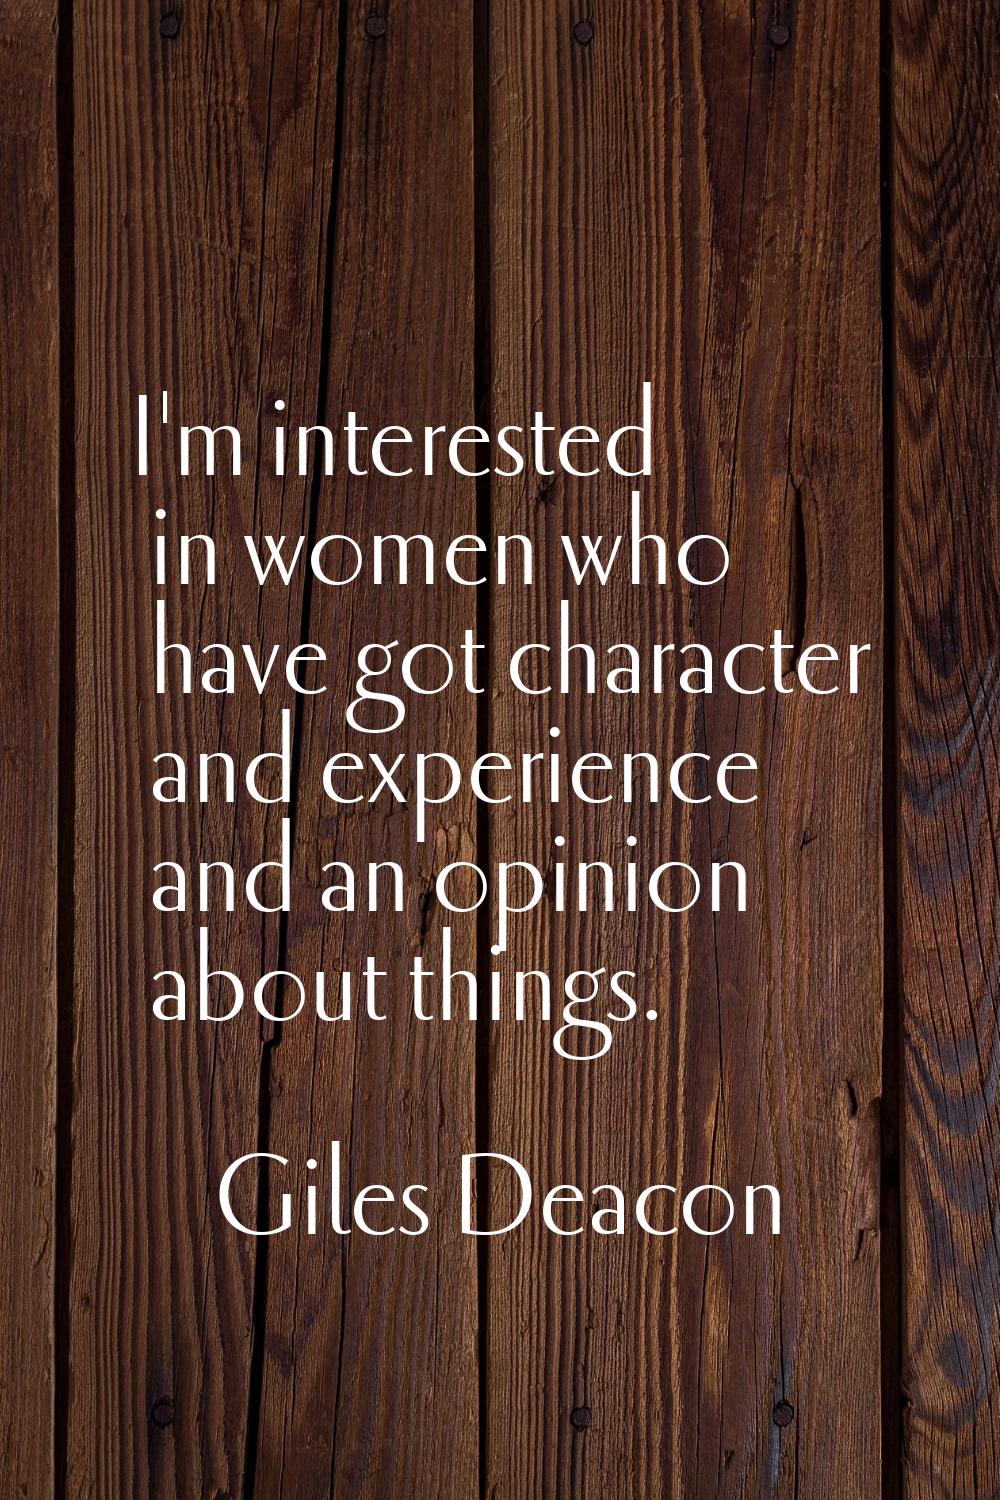 I'm interested in women who have got character and experience and an opinion about things.